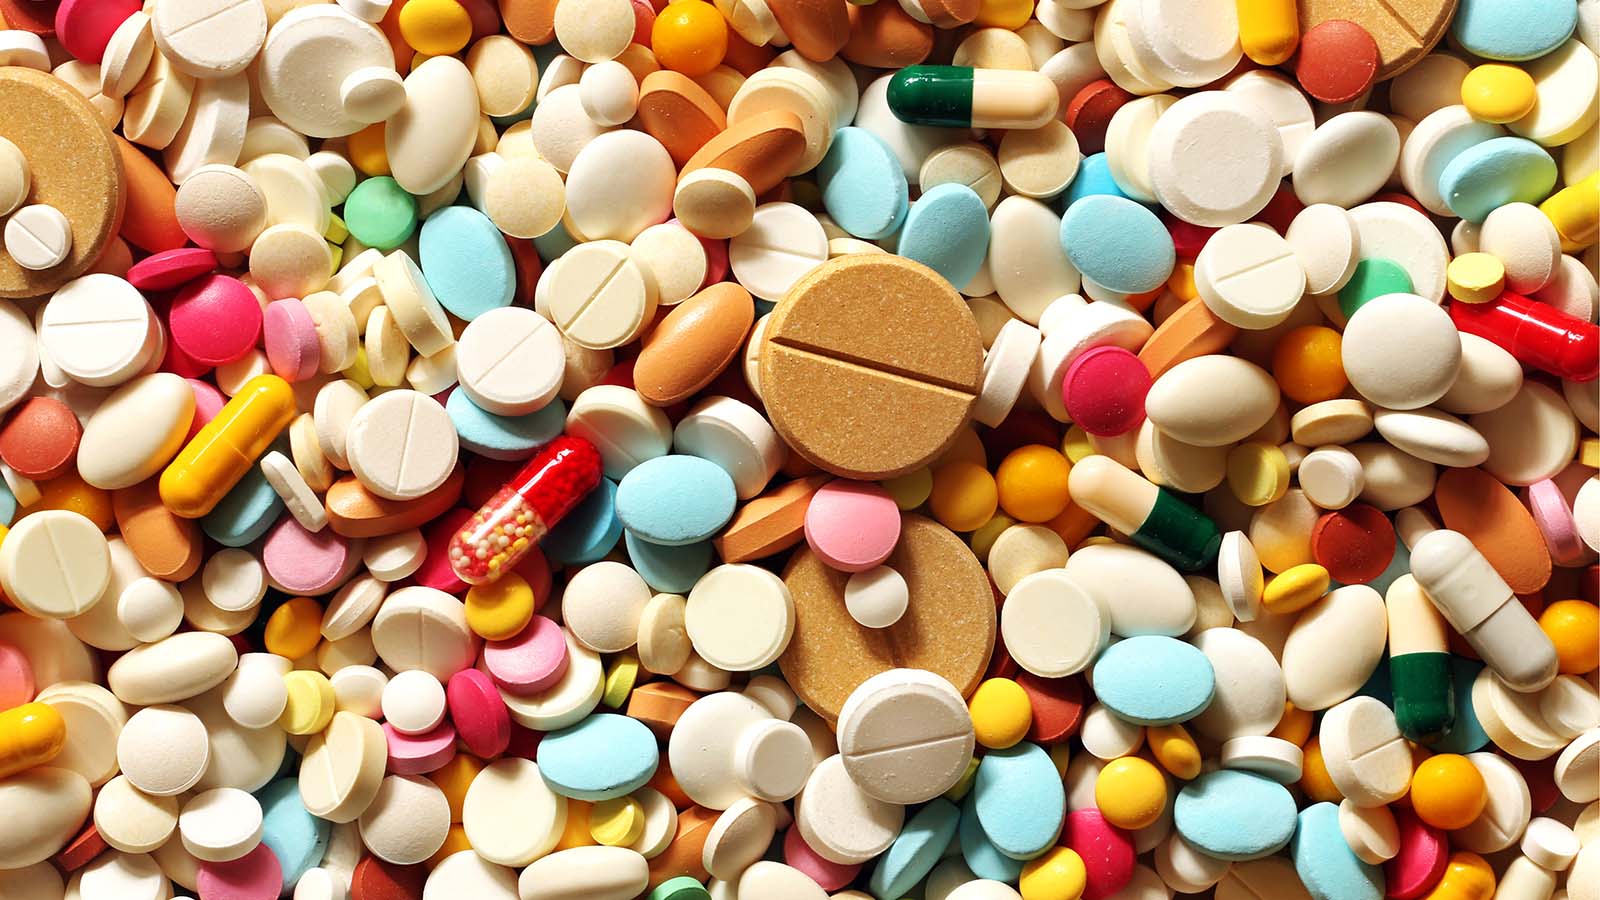 A pile of brightly colored pills in varying sizes and shapes representing IKT stock.